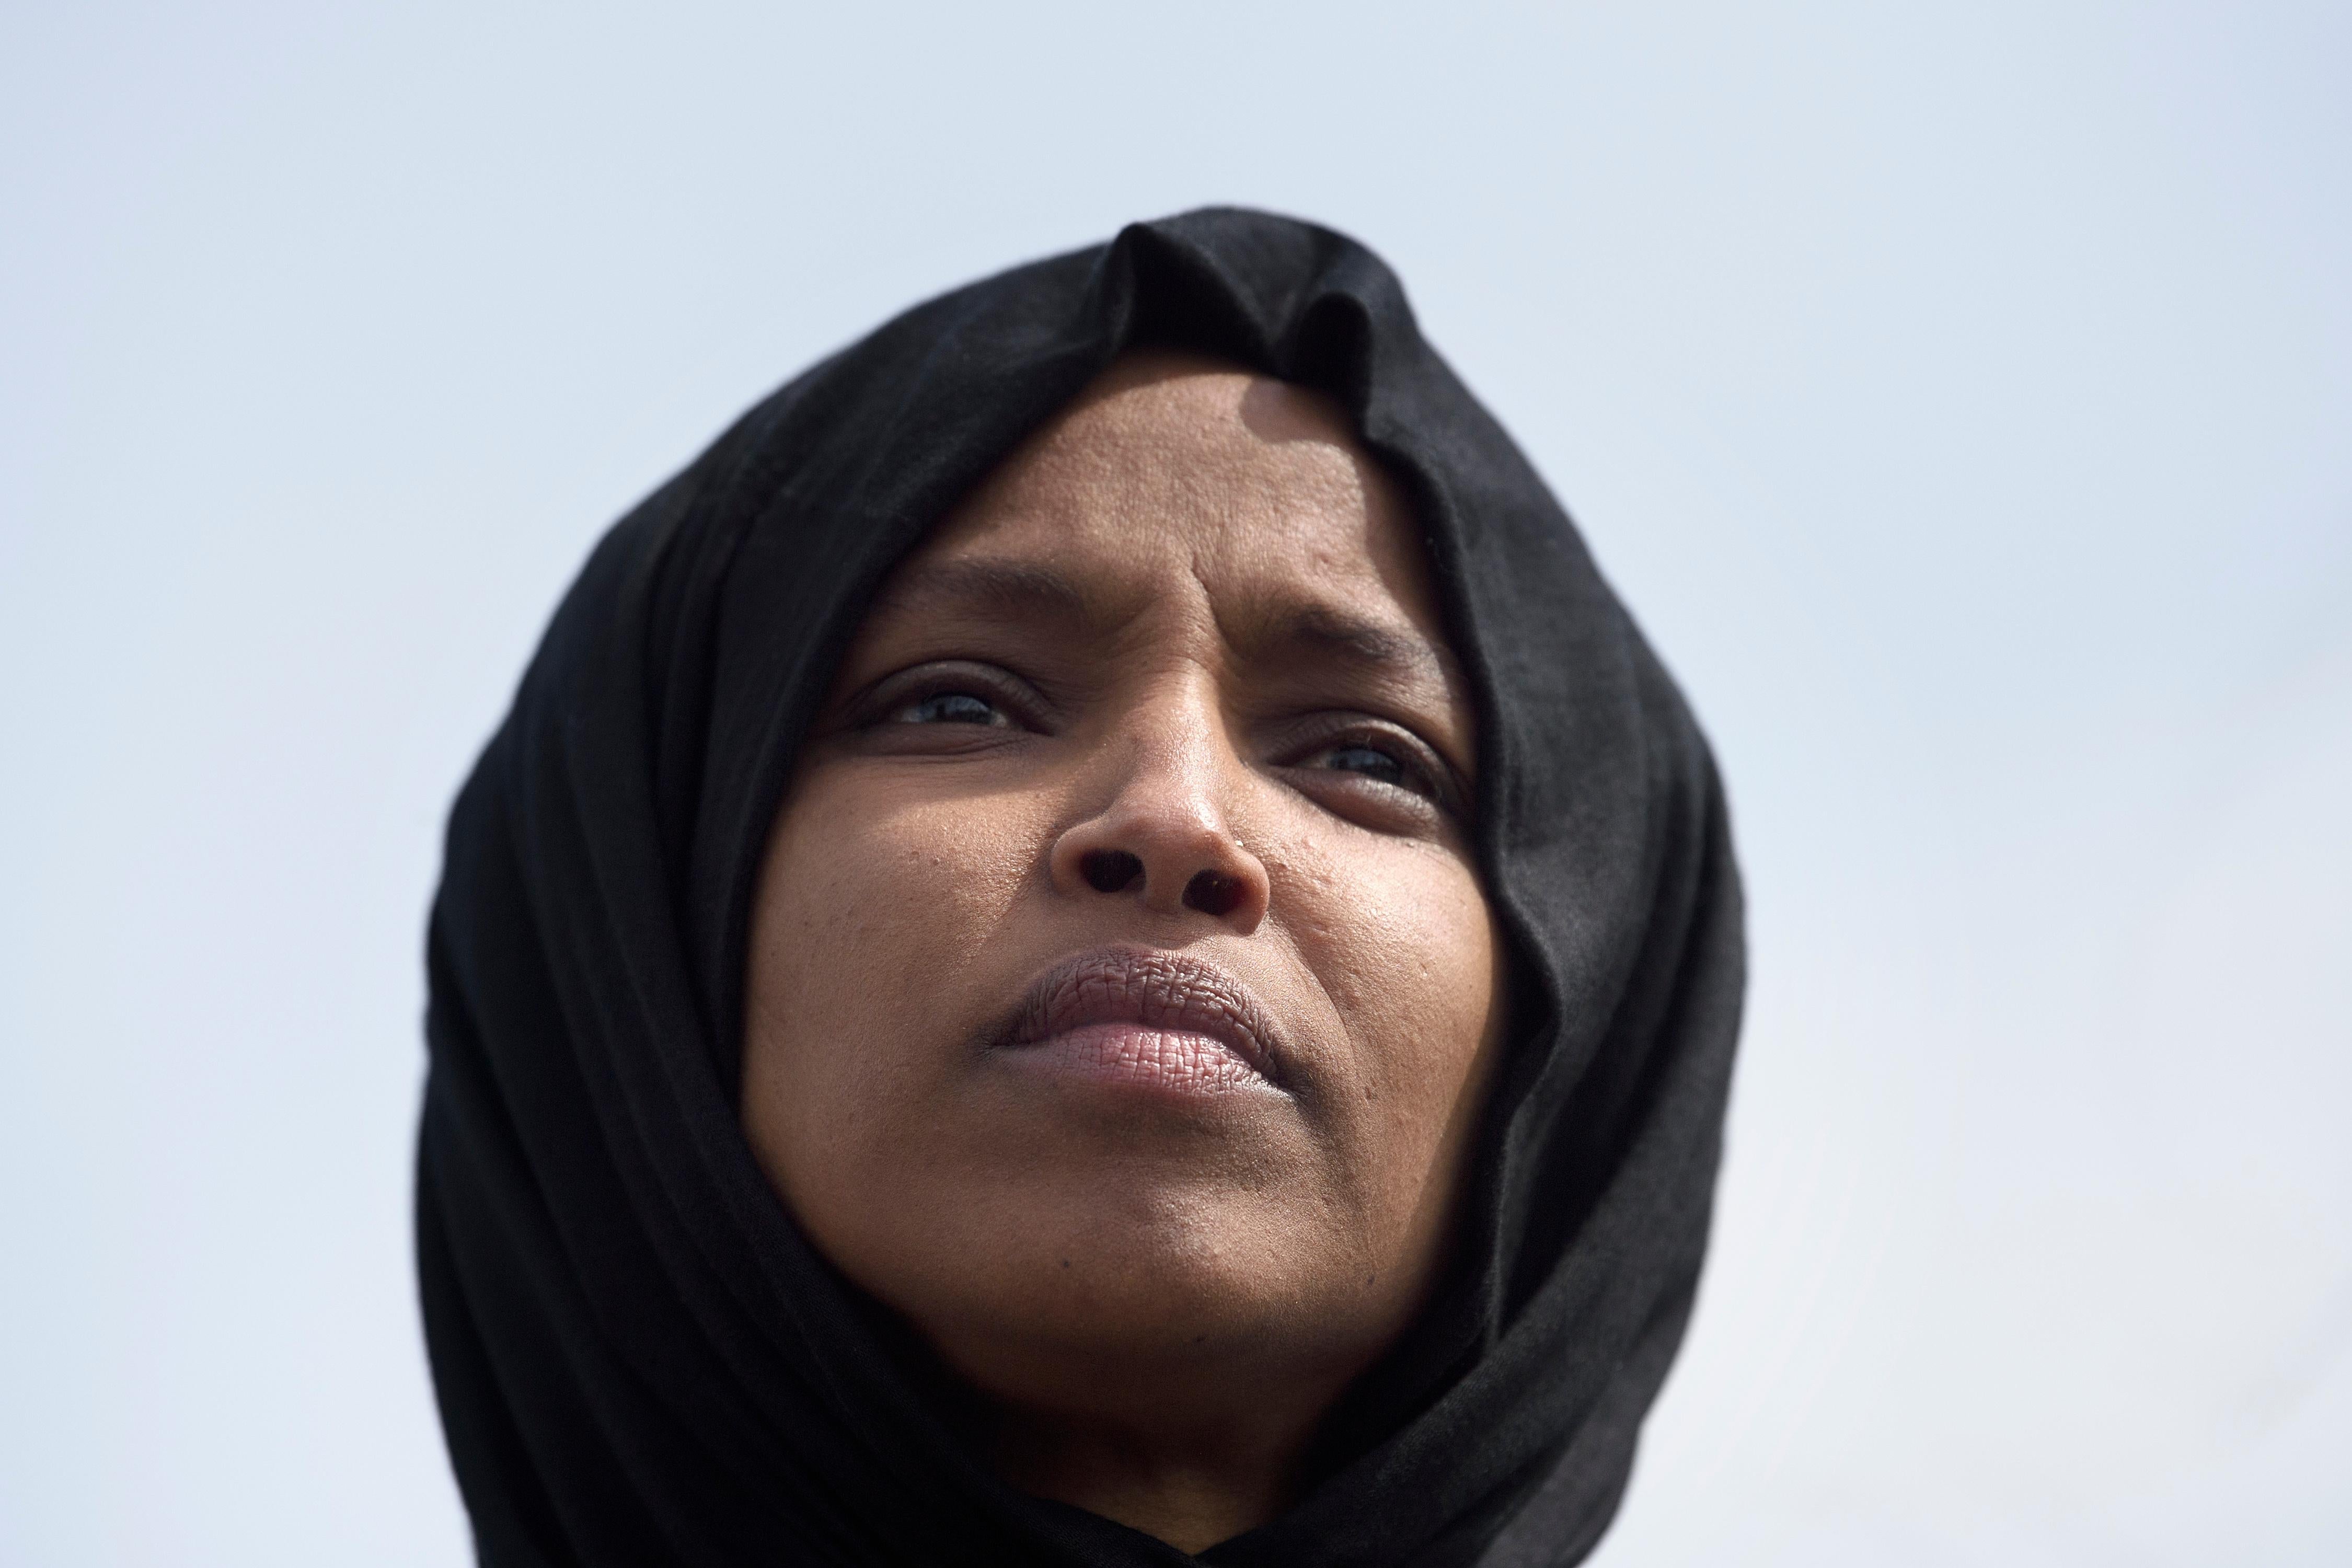 A close-up of Ilhan Omar.